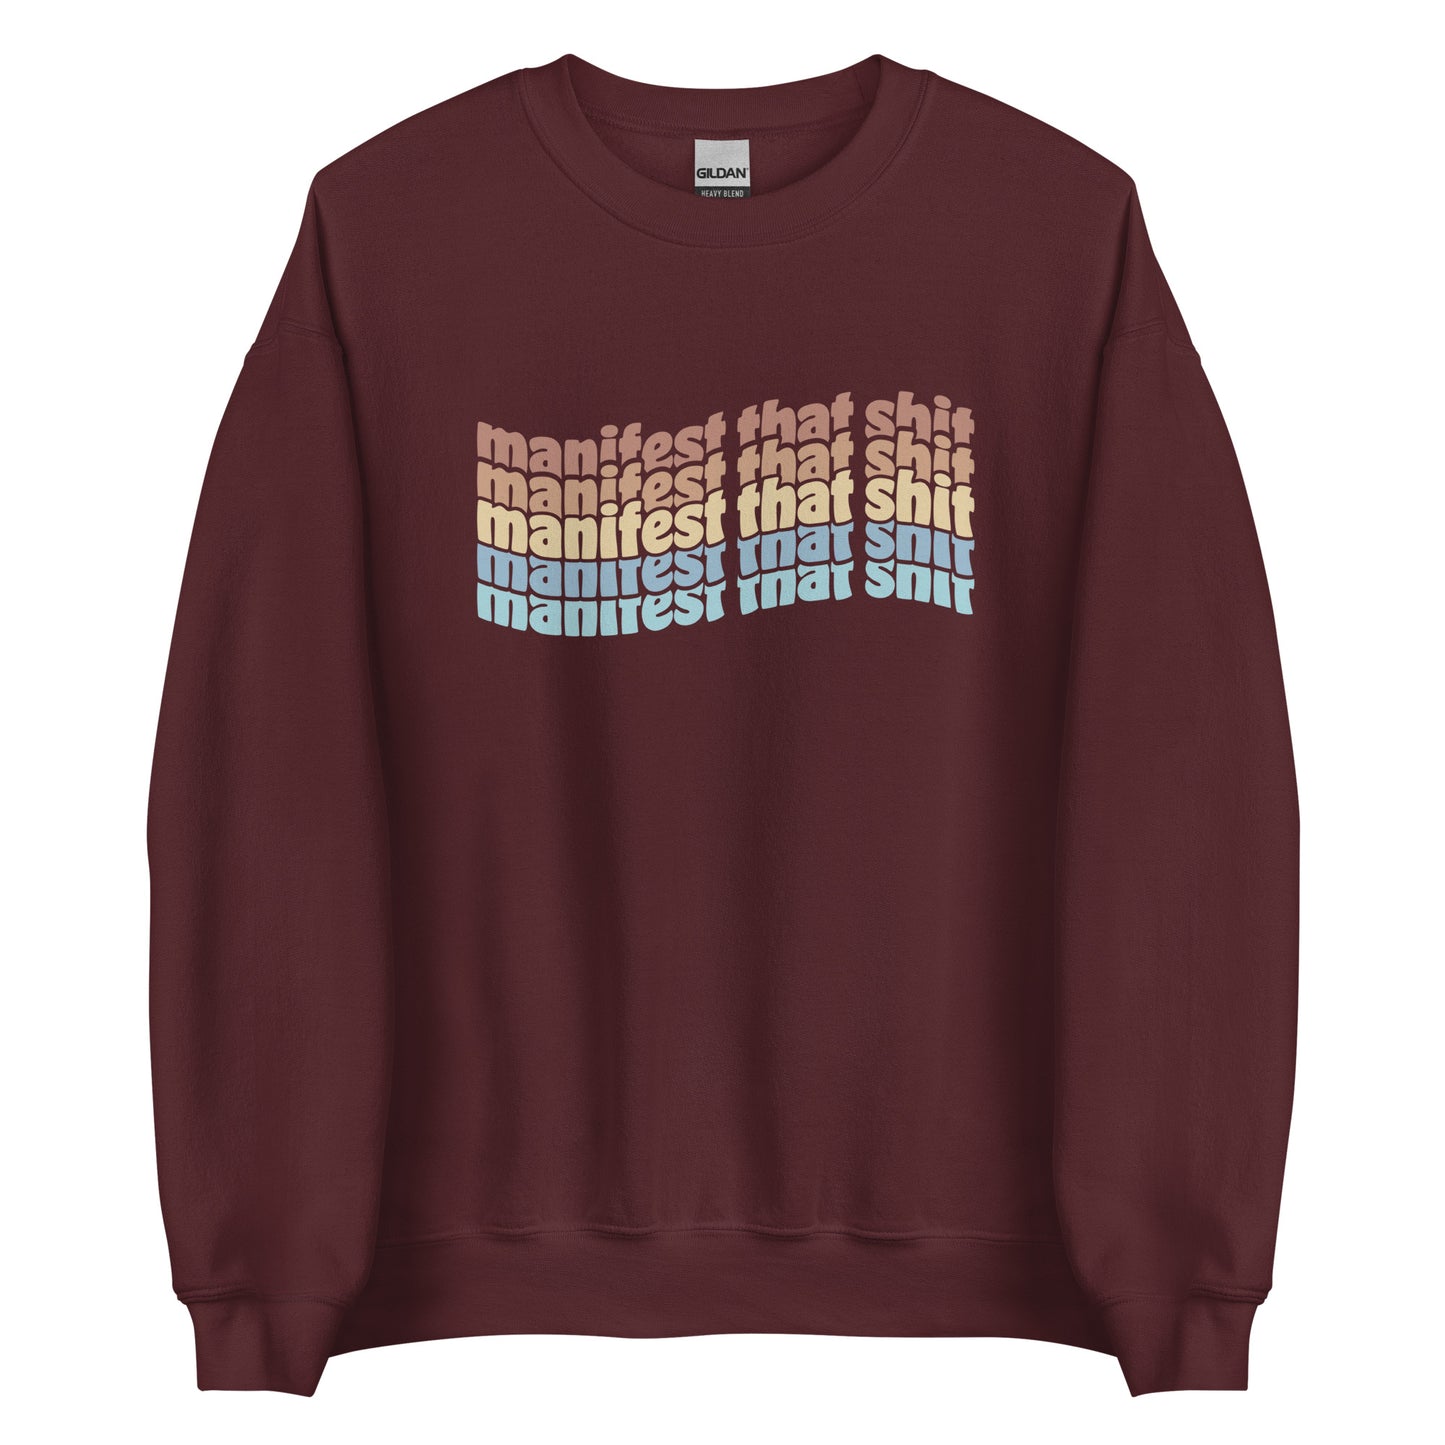 A maroon crewneck sweatshirt featuring stacked text that reads "manifest that shit" in a rainbow of colors.